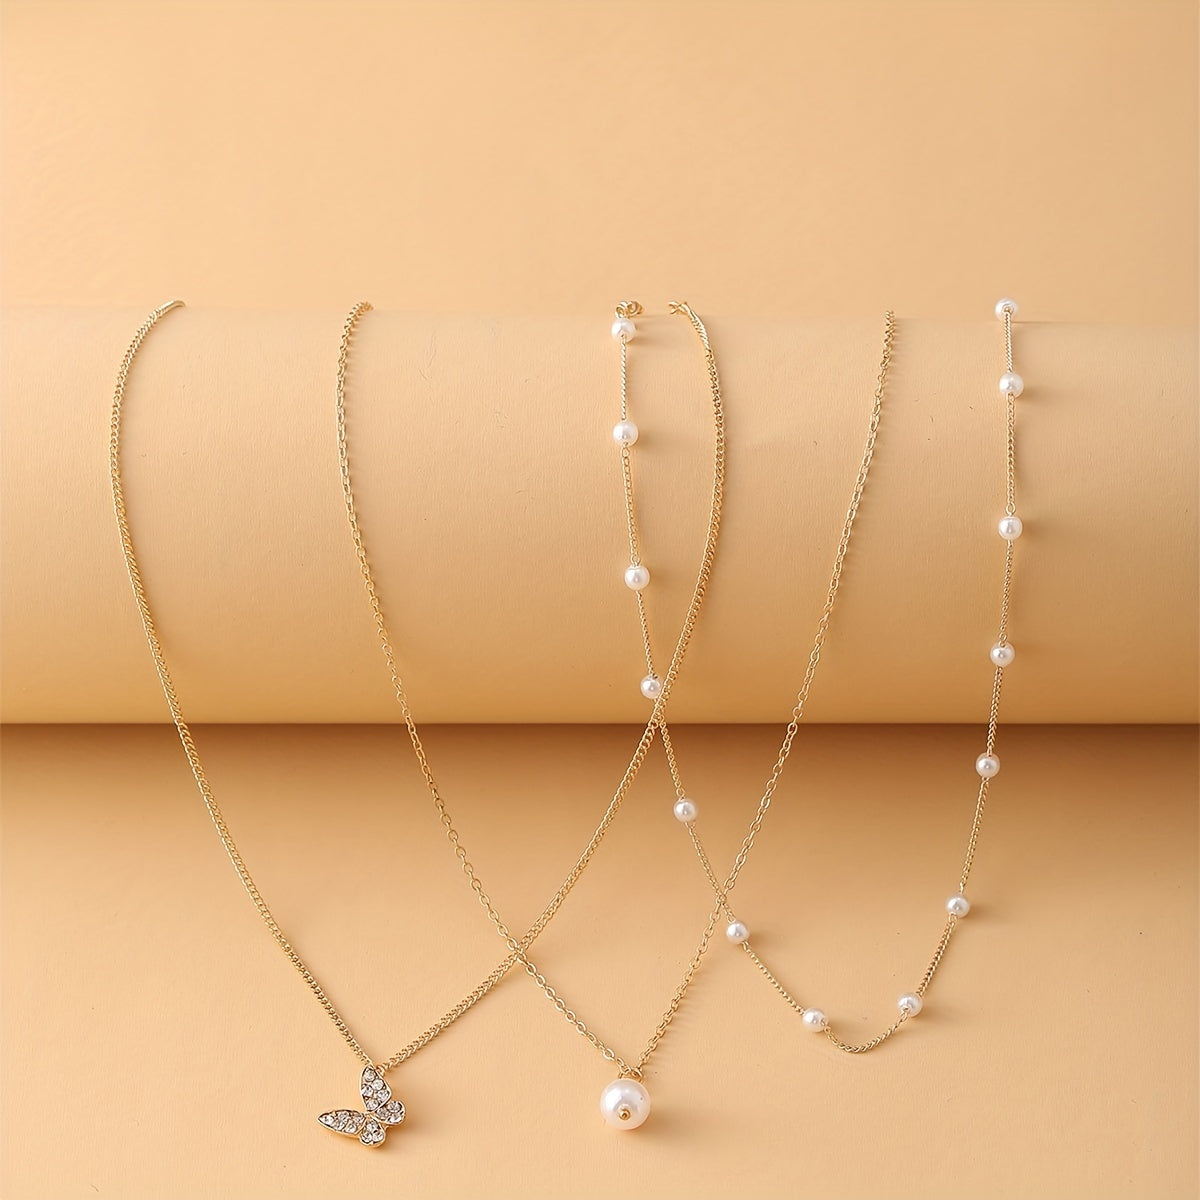 3pcs Faux Pearl Butterfly Necklace For Women Leisure Decor Jewelry